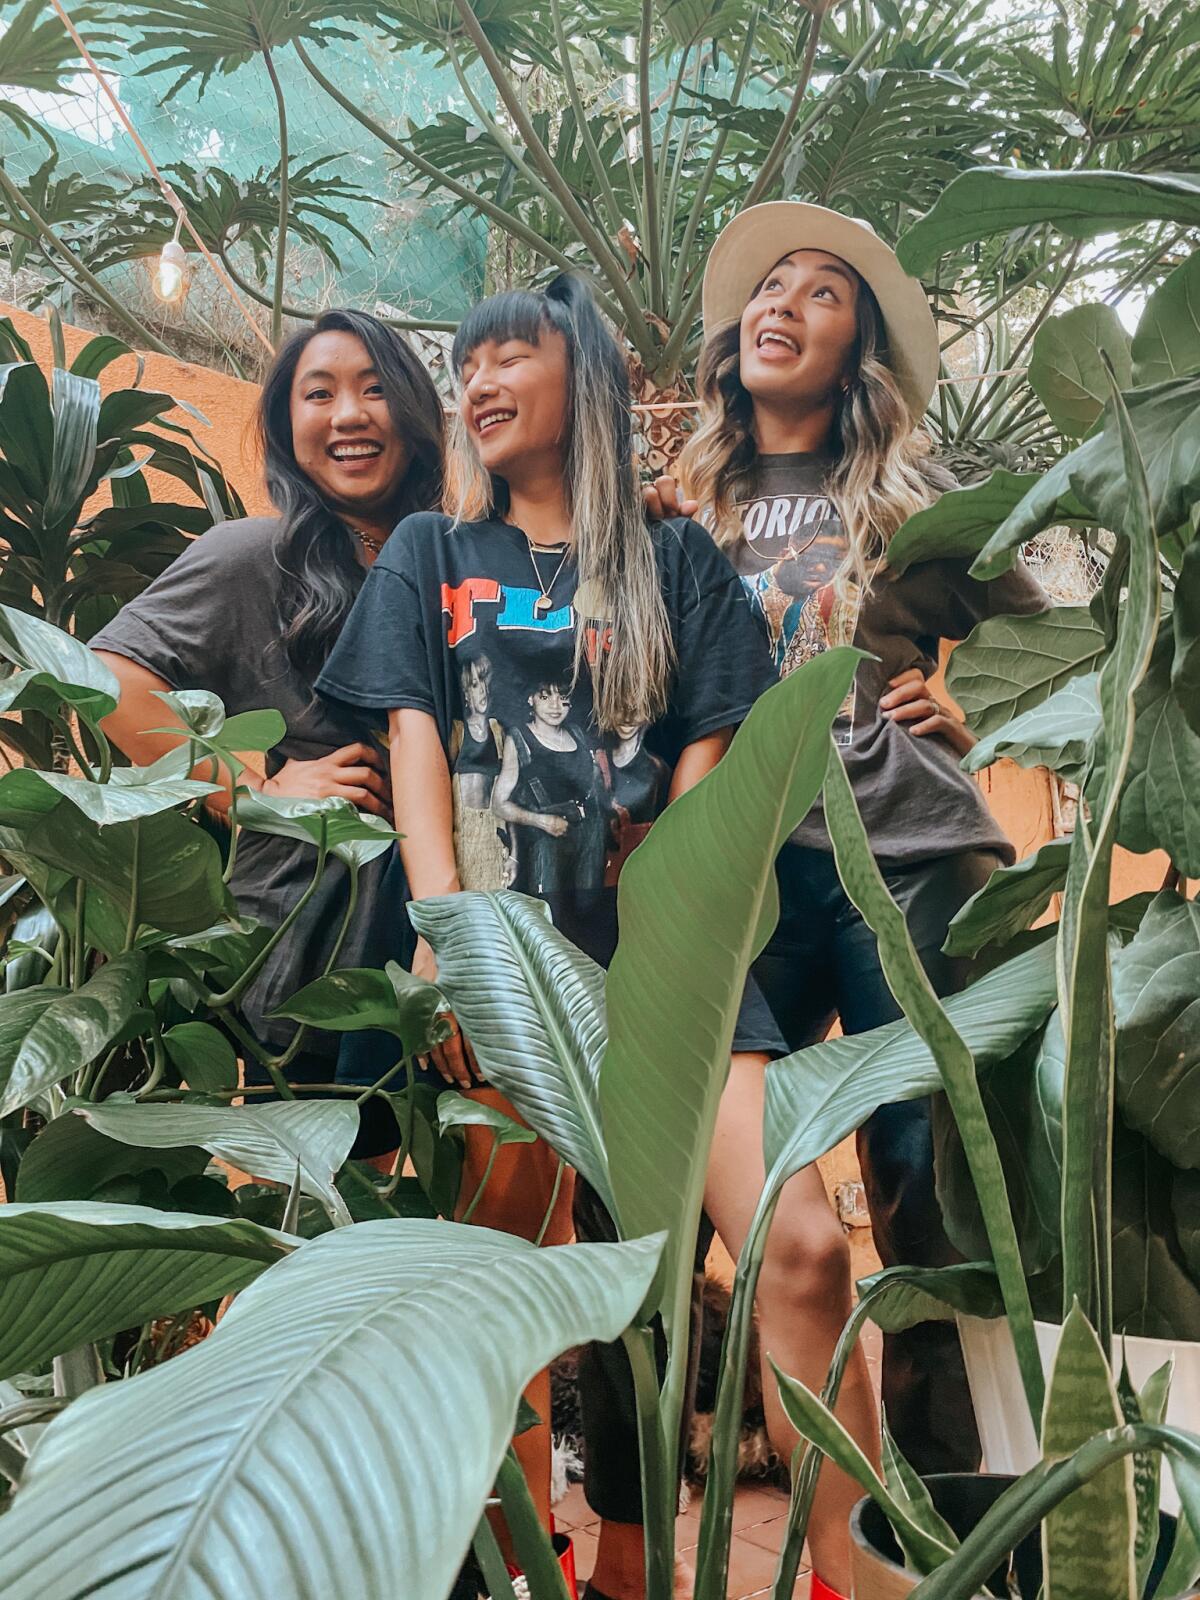 Three women dressed in dark-colored, loose T-shirts smile surrounded by plants and greenery.